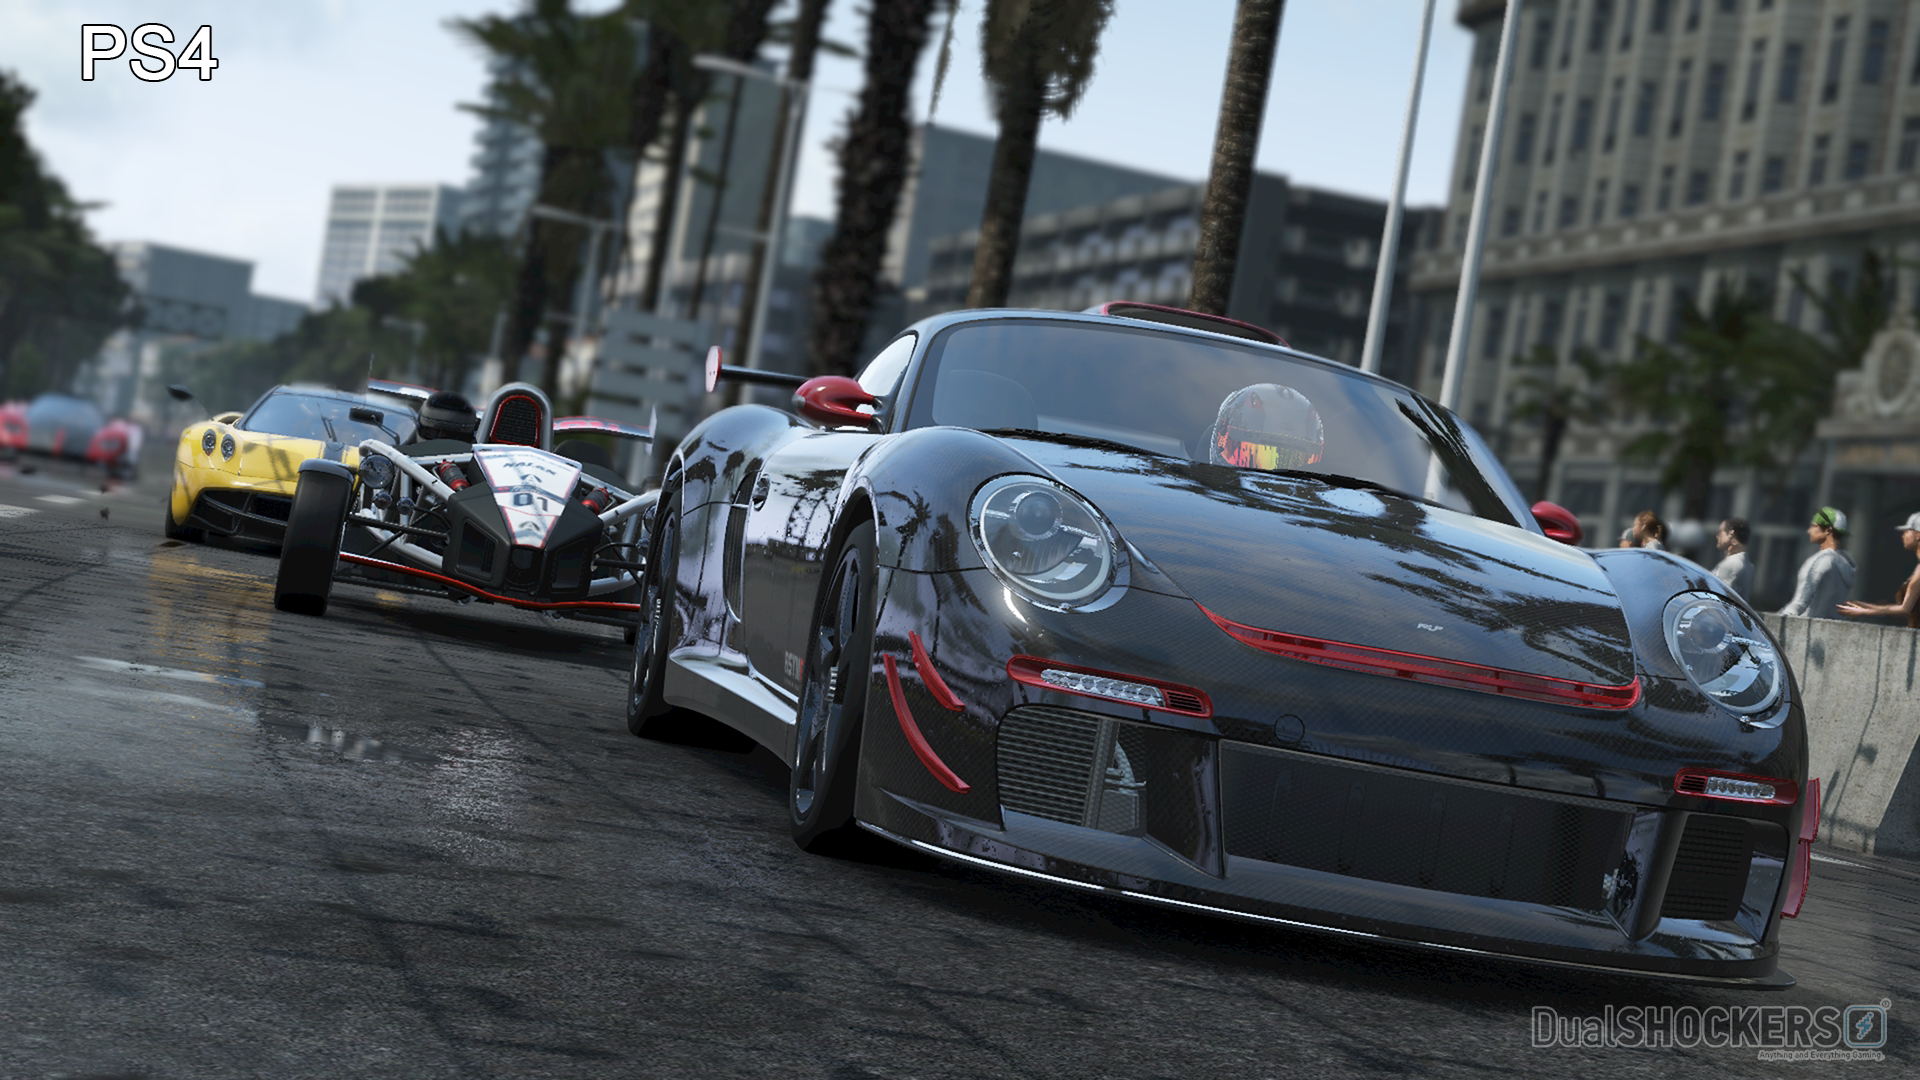 Cars 4 игра. Project cars ps4. Project cars 3. Проджект карс 4. PLAYSTATION 4 Project cars.